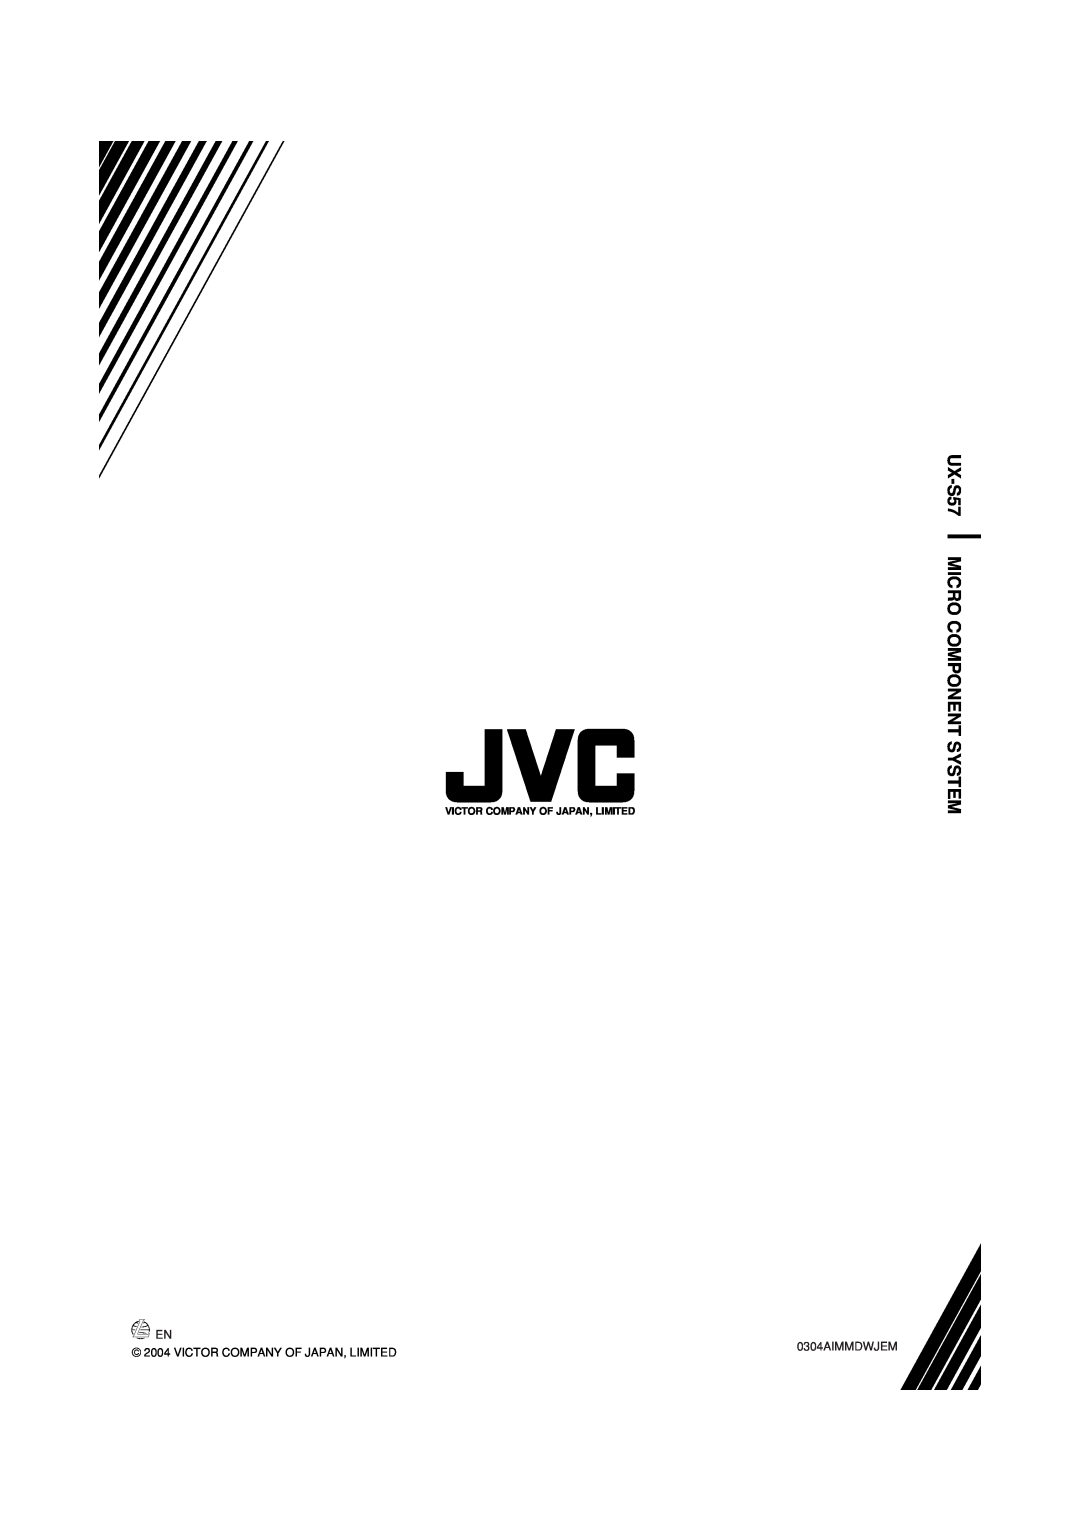 JVC manual UX-S57MICRO COMPONENT SYSTEM, 0304AIMMDWJEM, Victor Company Of Japan, Limited 